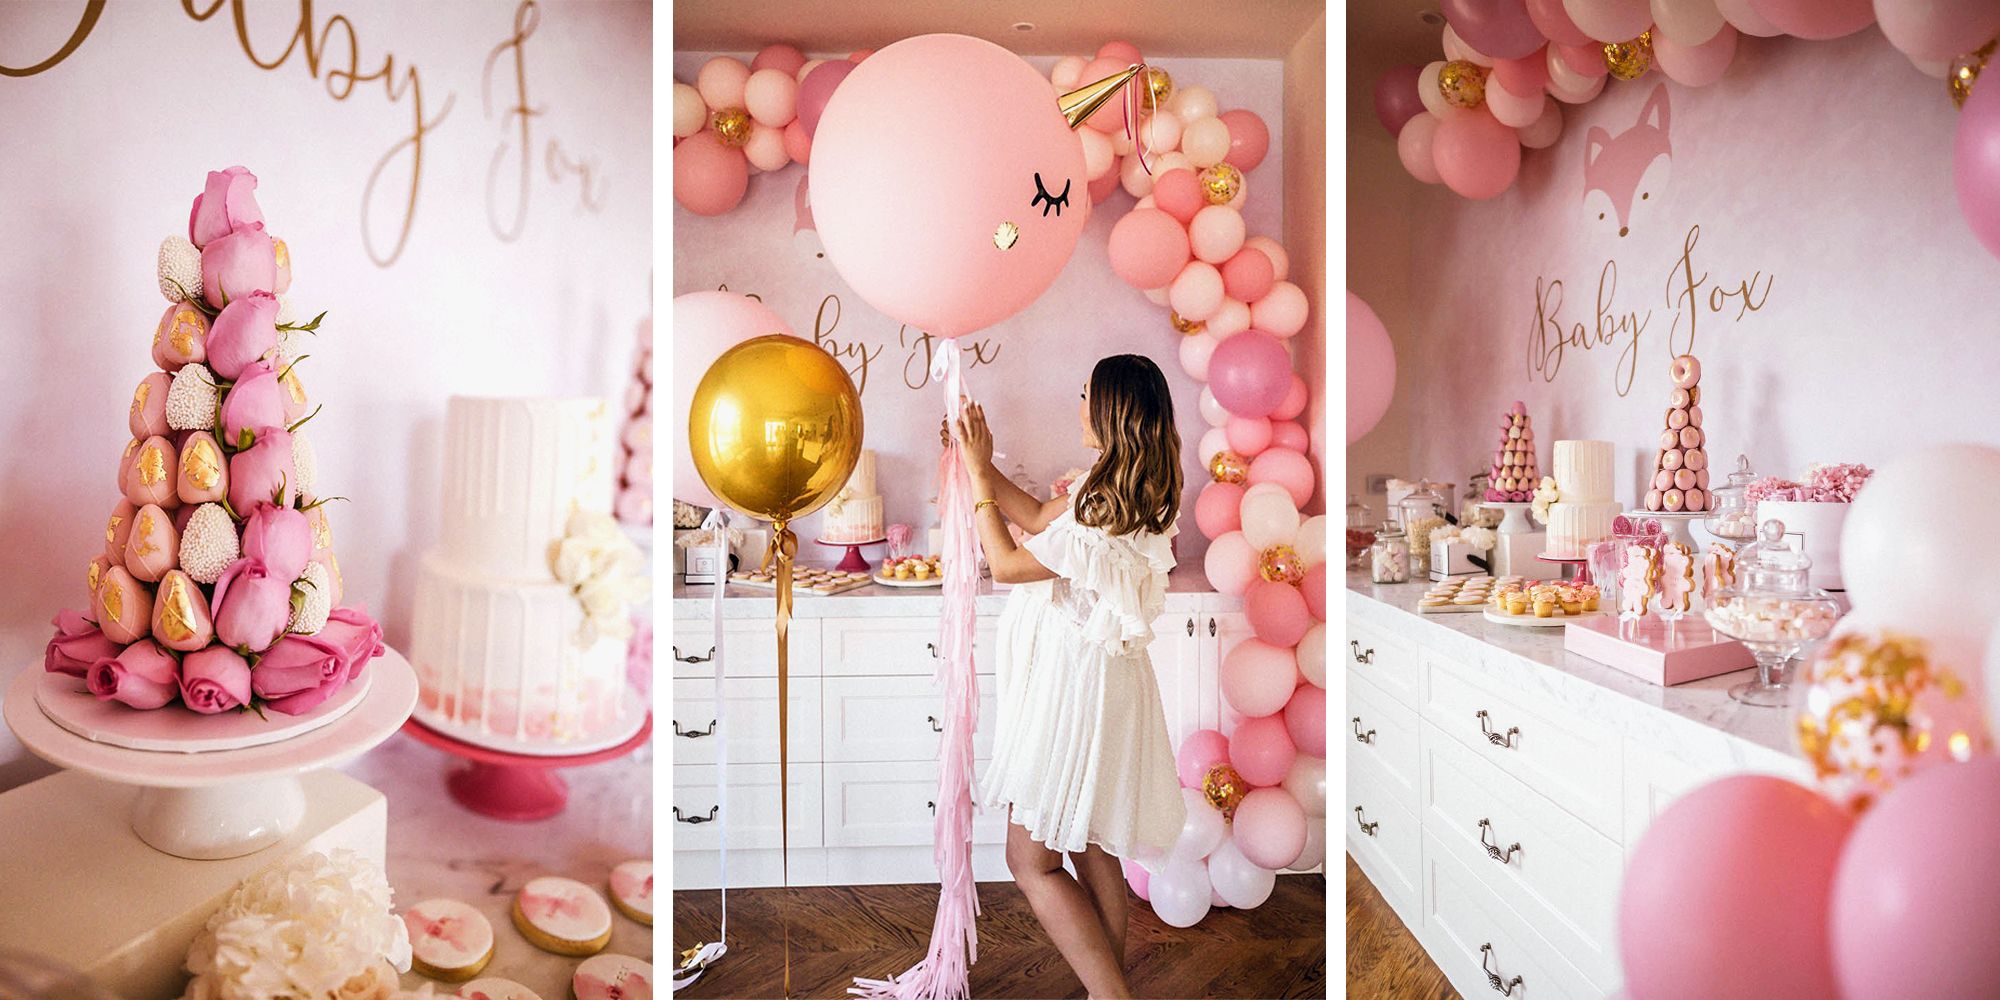 7 Best Baby Shower Ideas for Trendy Baby Shower Decorations & Themes